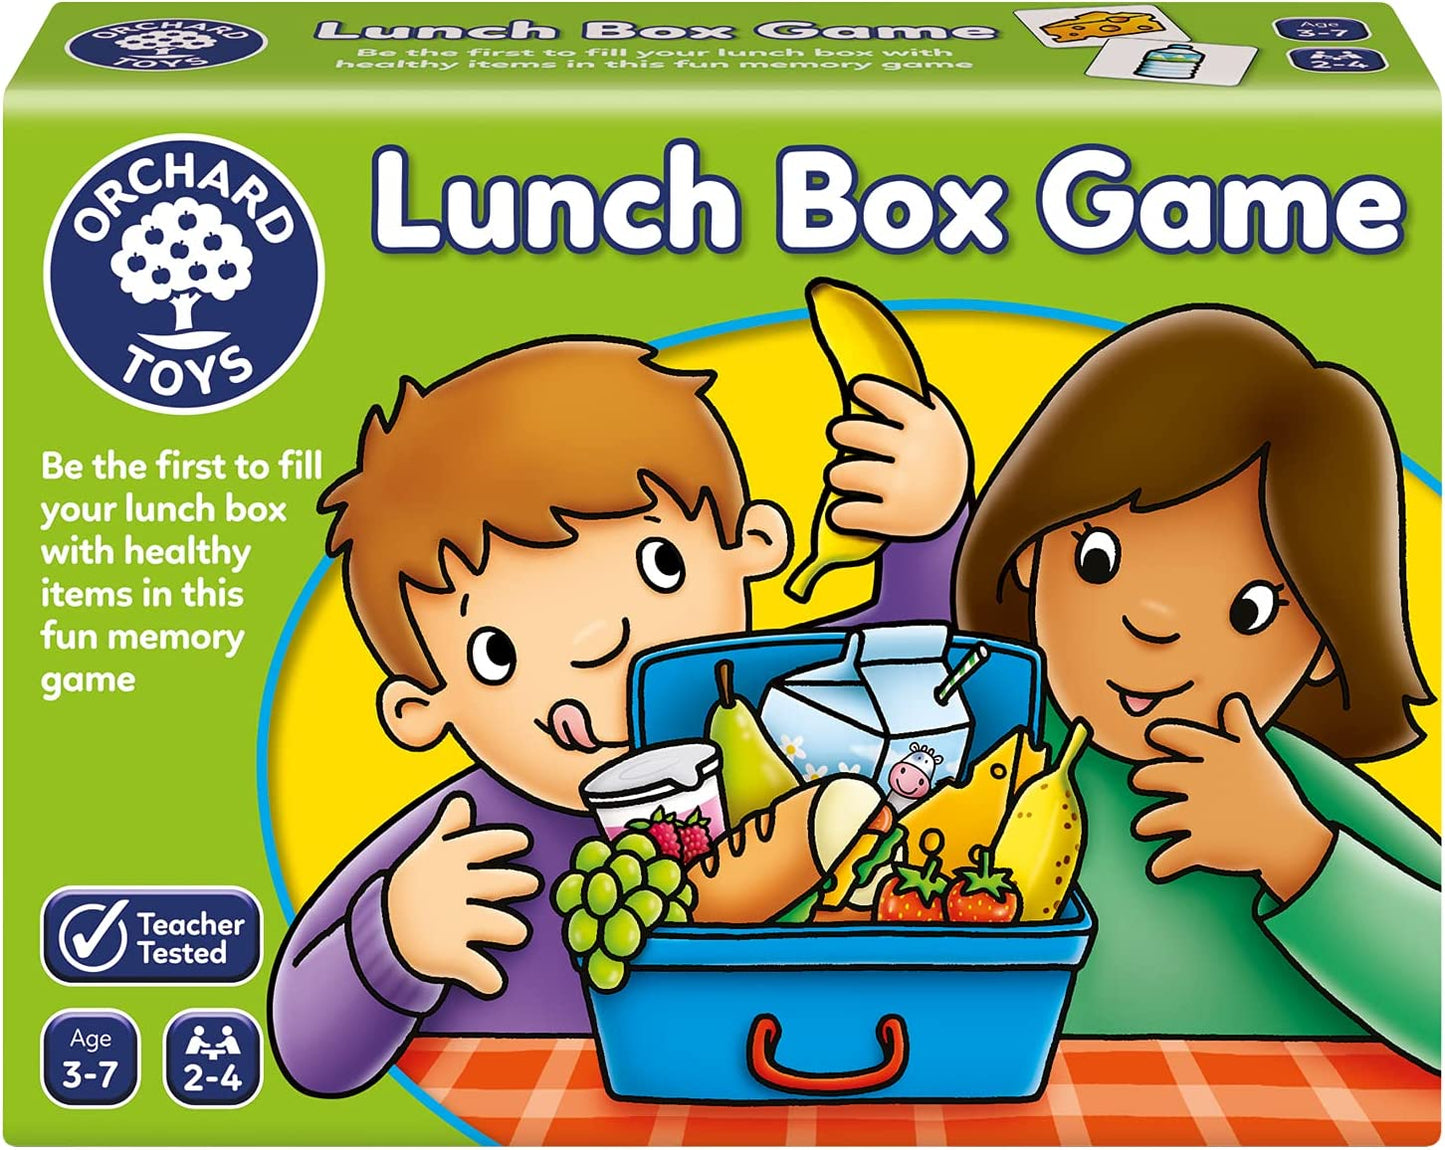 Lunch Box Game Orchard Toys